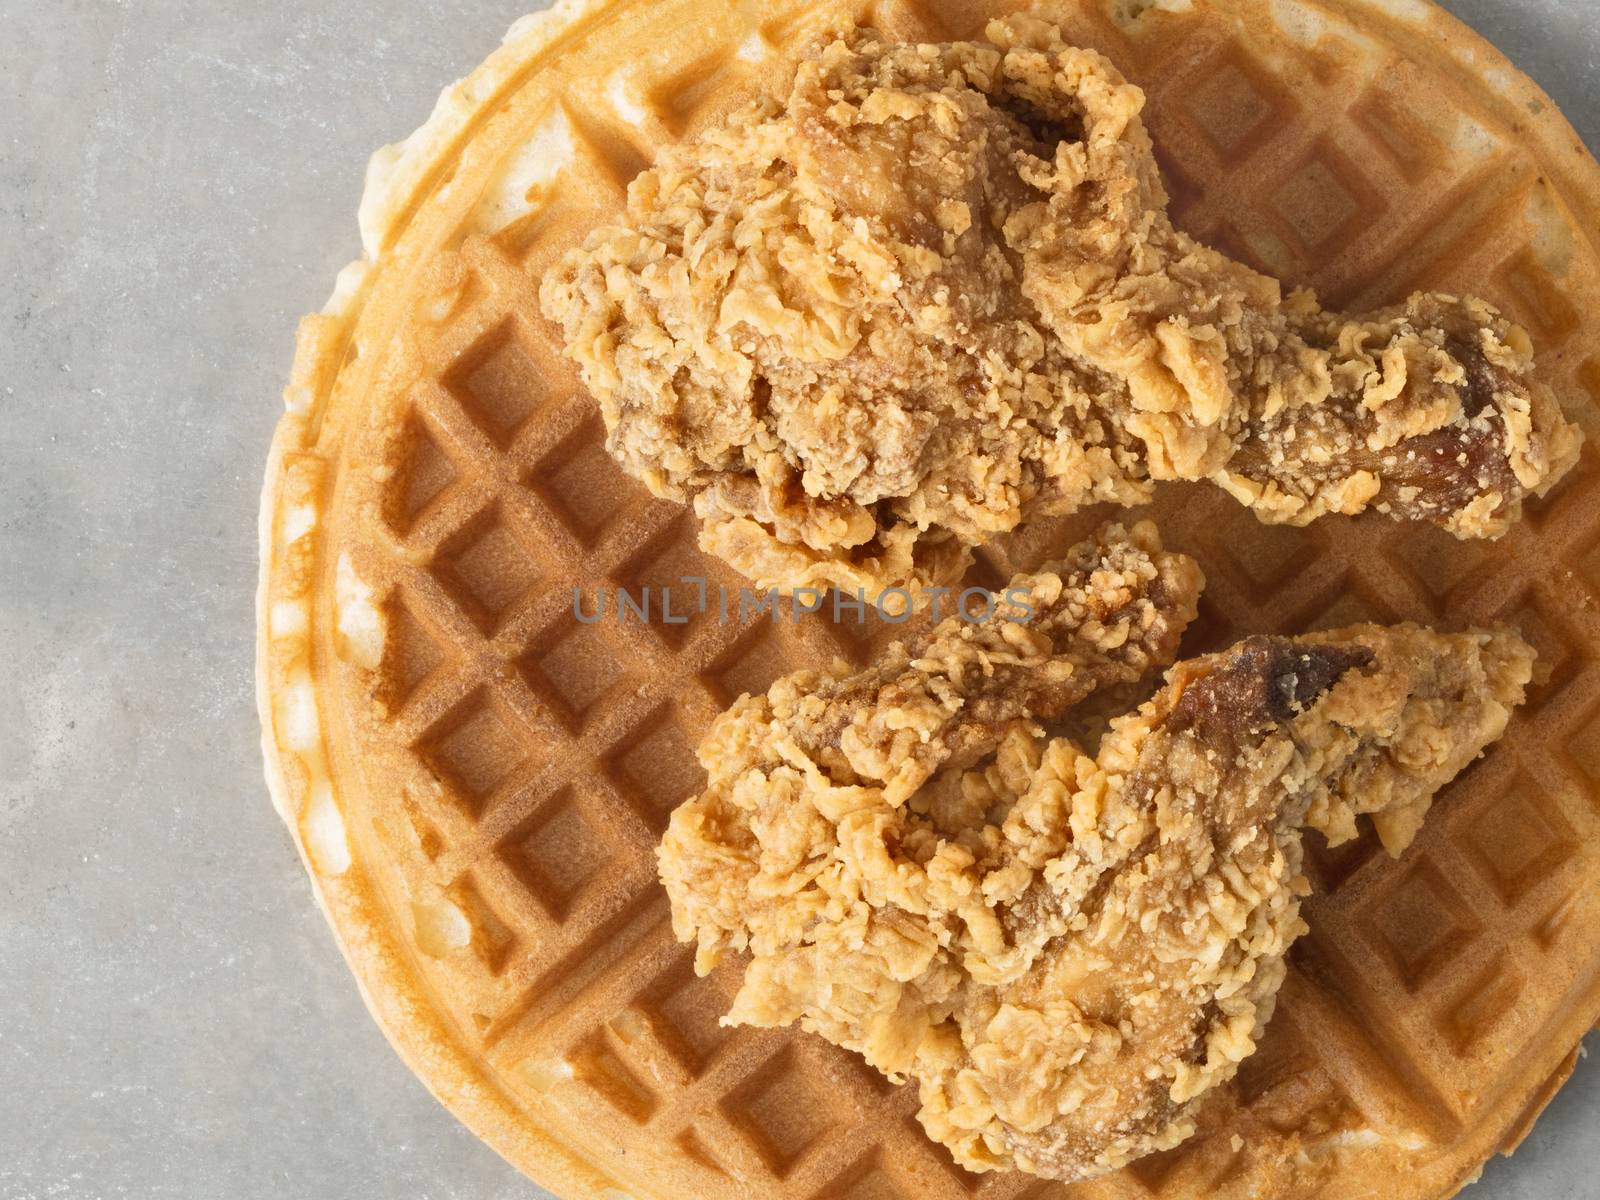 rustic southern american comfort food chicken waffle by zkruger